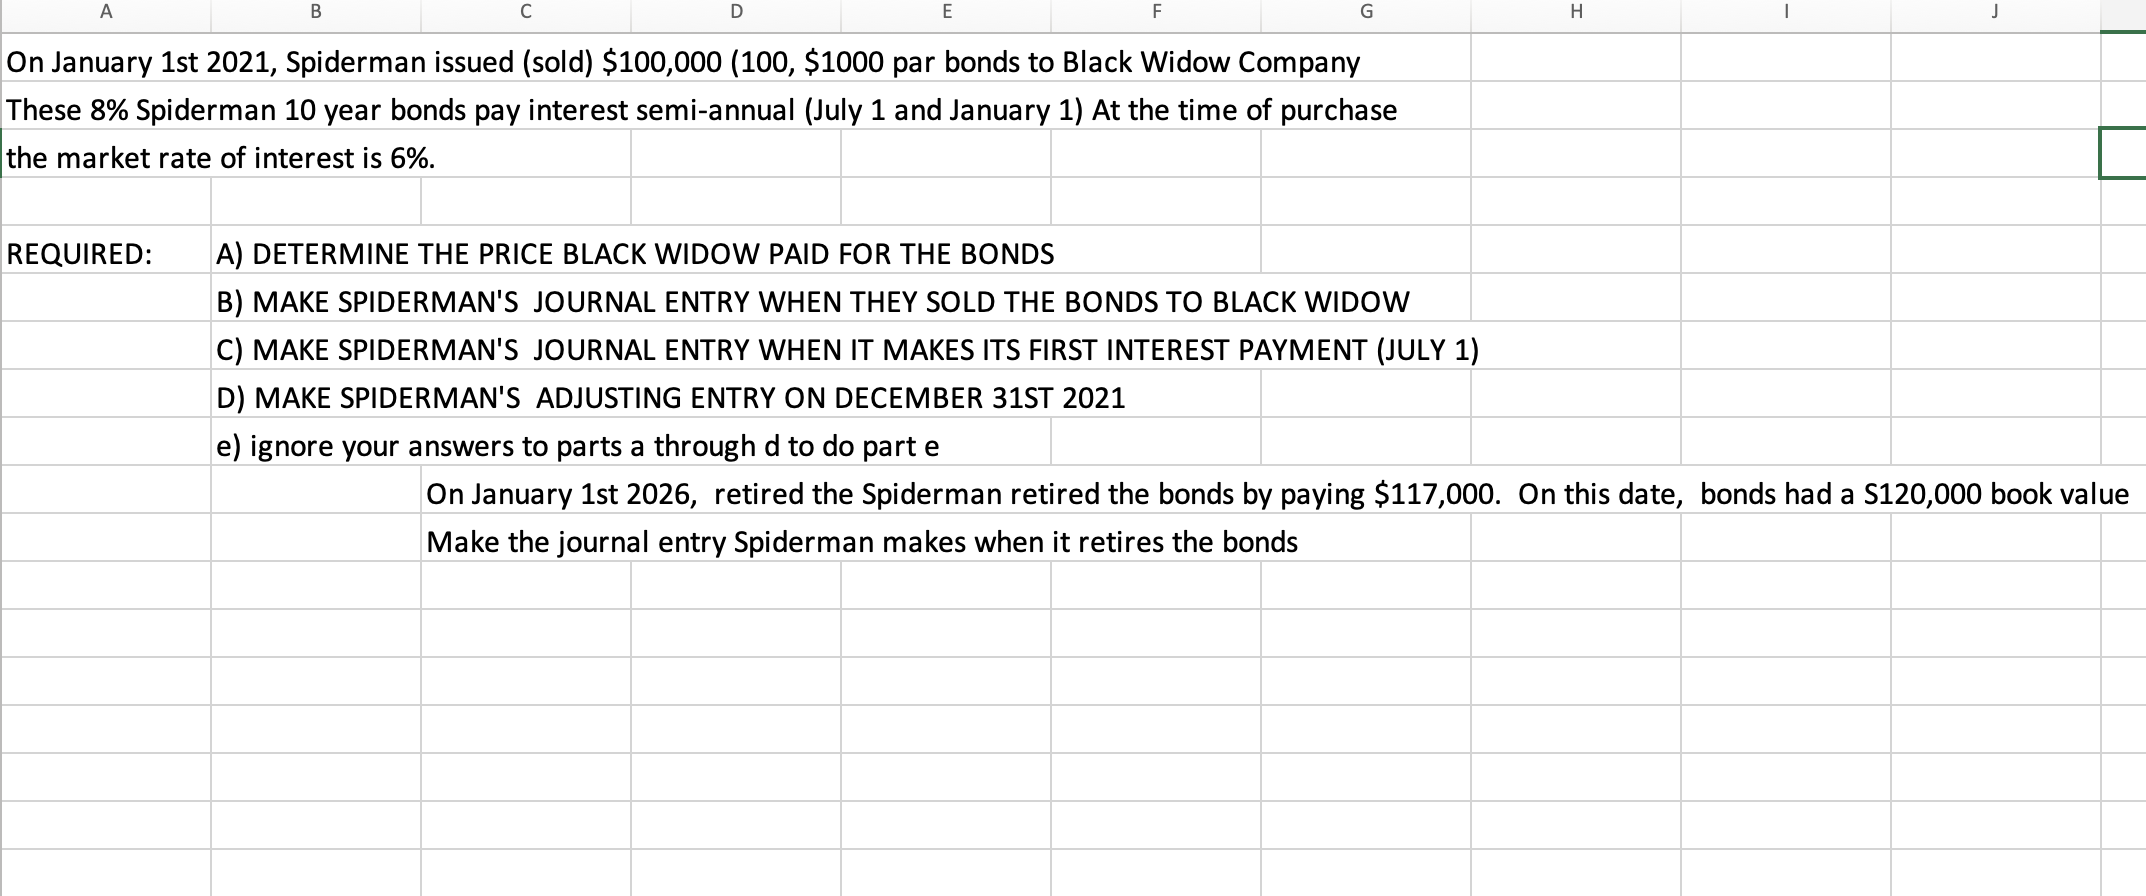 A B? DE FG H? 1j On January 1st 2021, Spiderman issued (sold) $100,000 (100, $1000 par bonds to Black Widow Company Thes